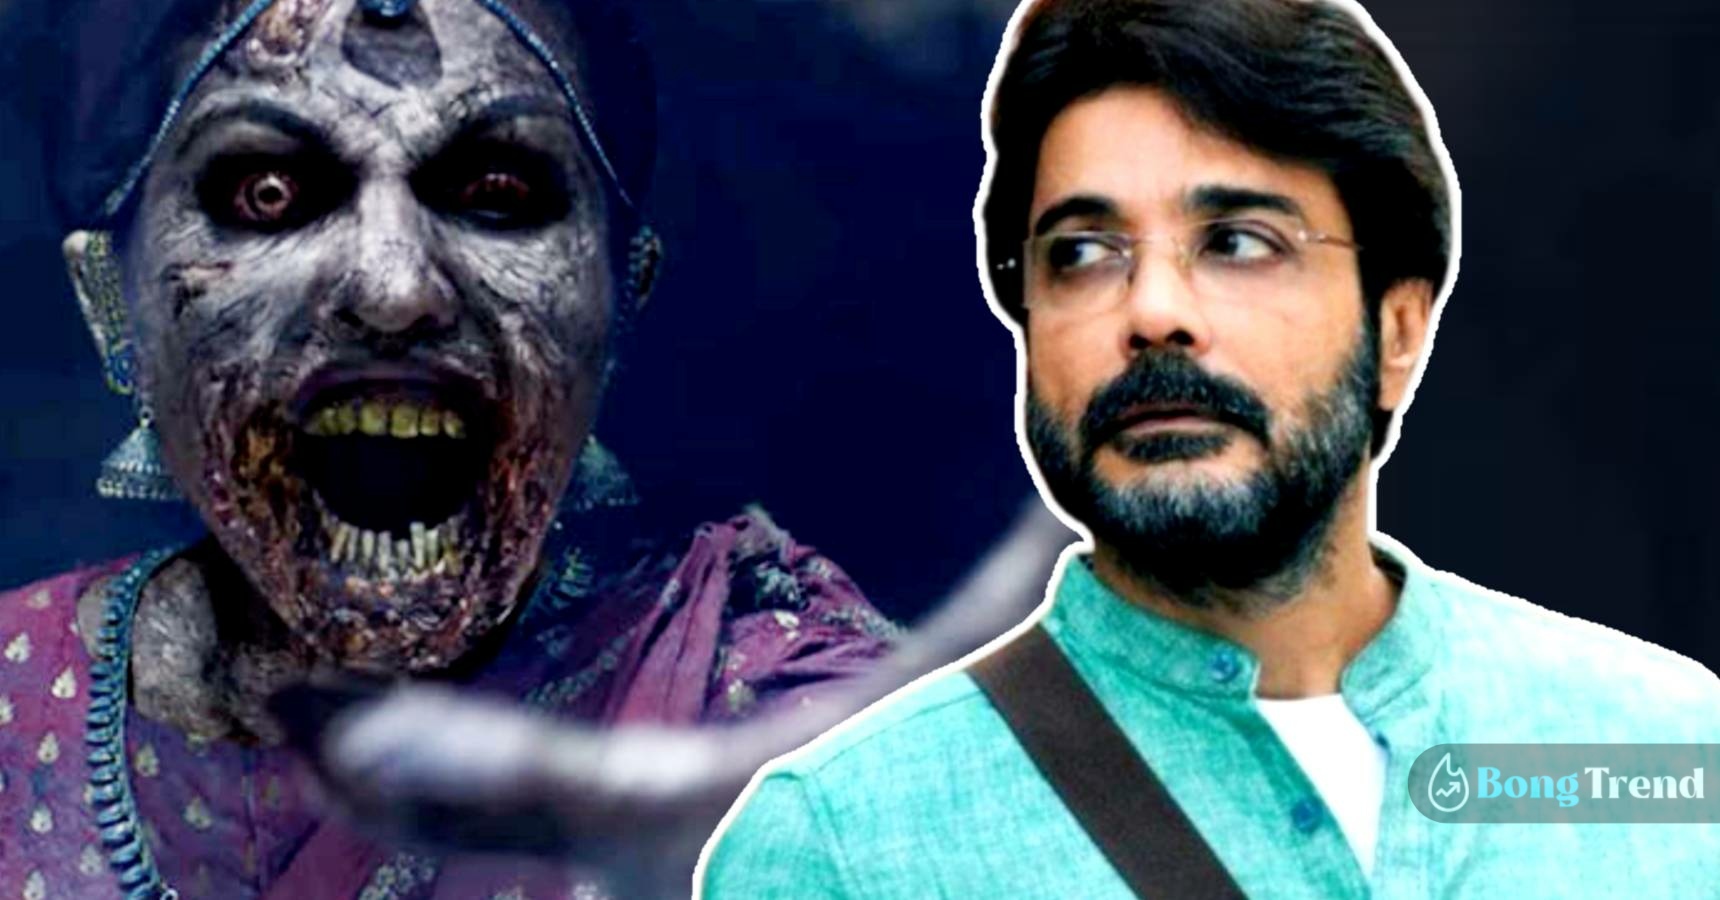 On Bhoot Choturdoshi take a look at the paranormal experience of Prosenjt Chatterjee